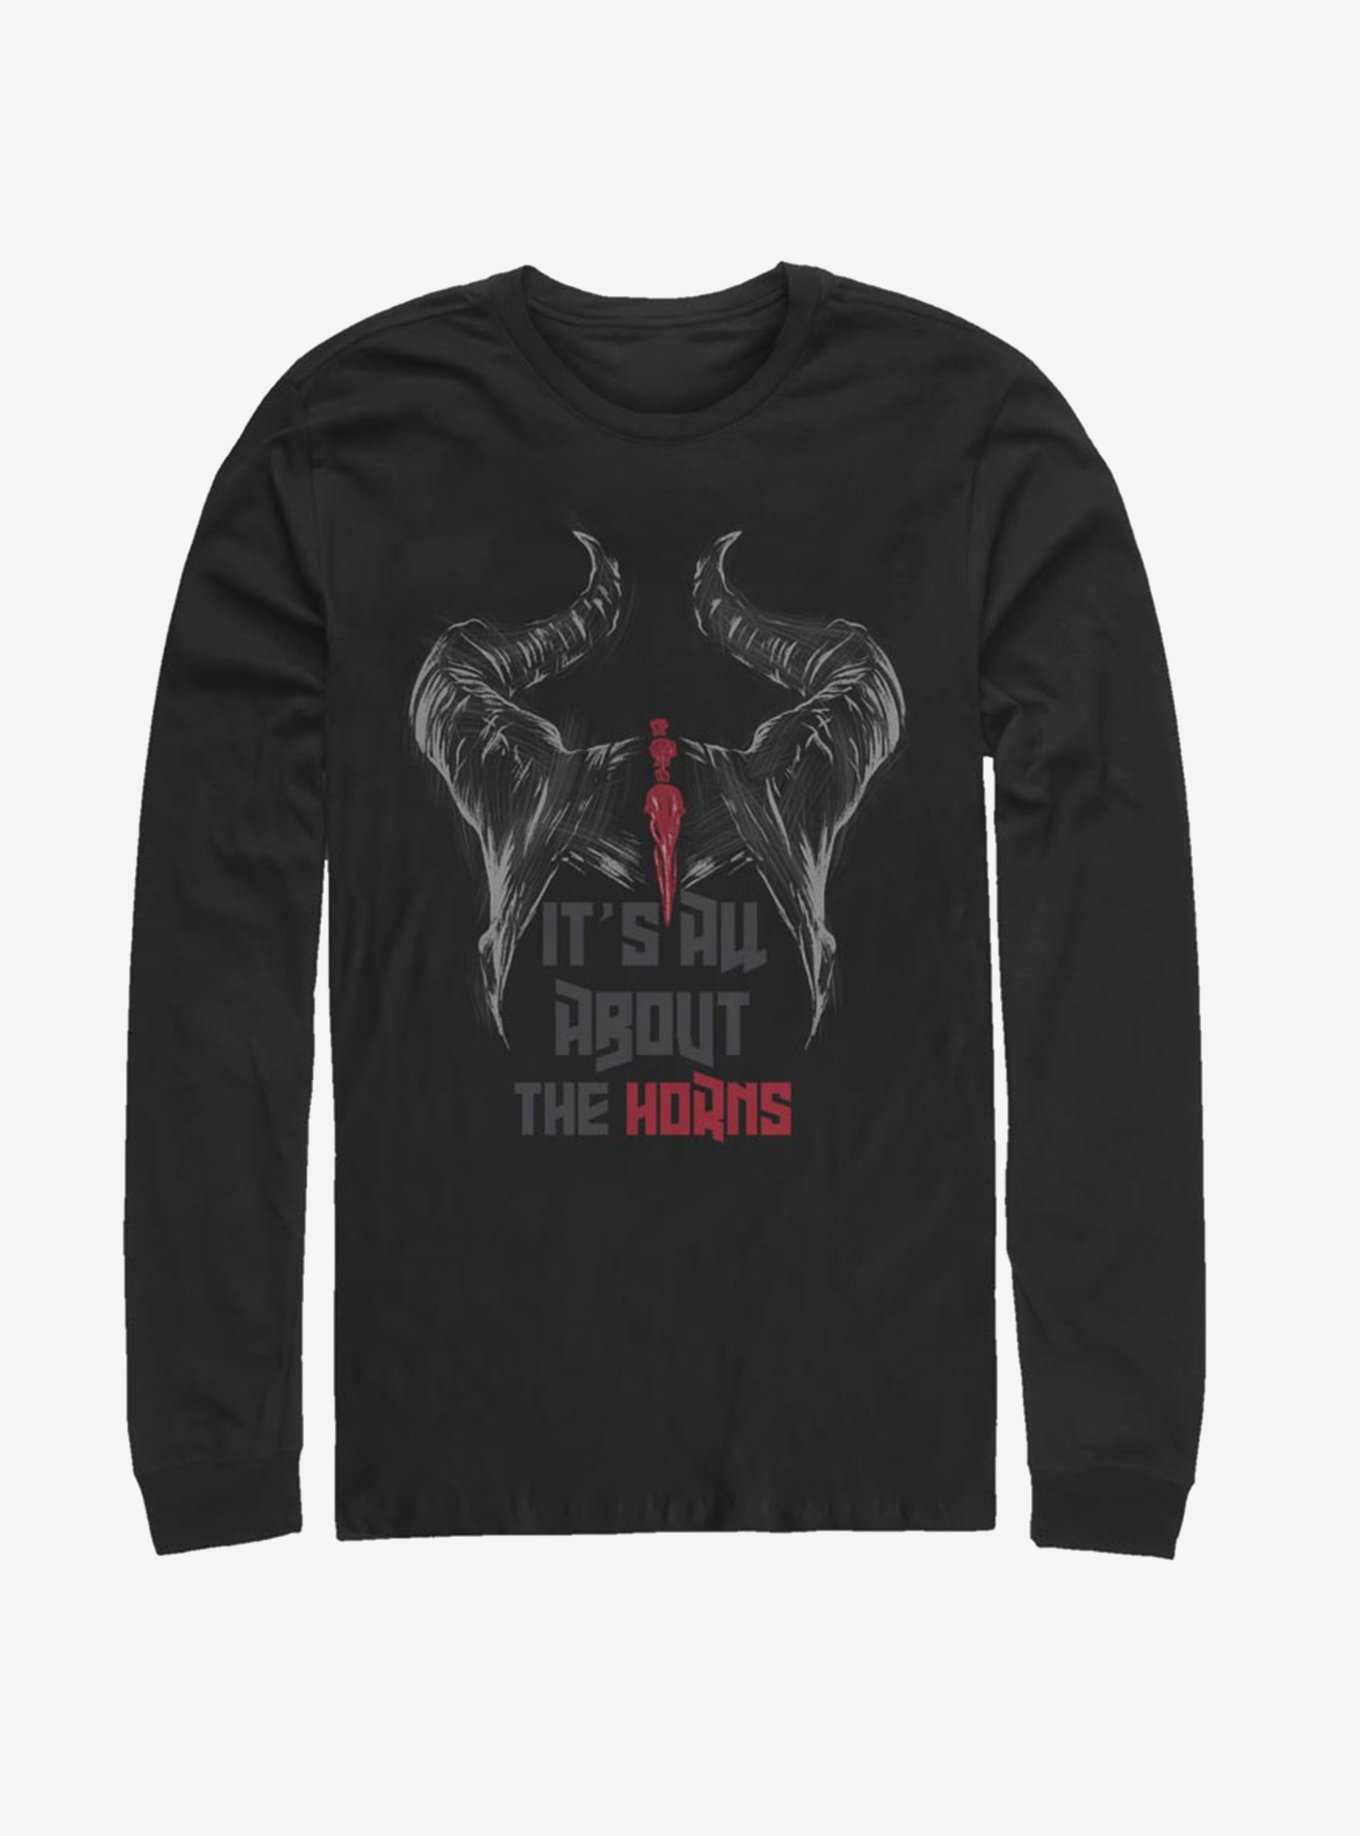 Disney Maleficent: Mistress Of Evil It's All About The Horns Long-Sleeve T-Shirt, , hi-res